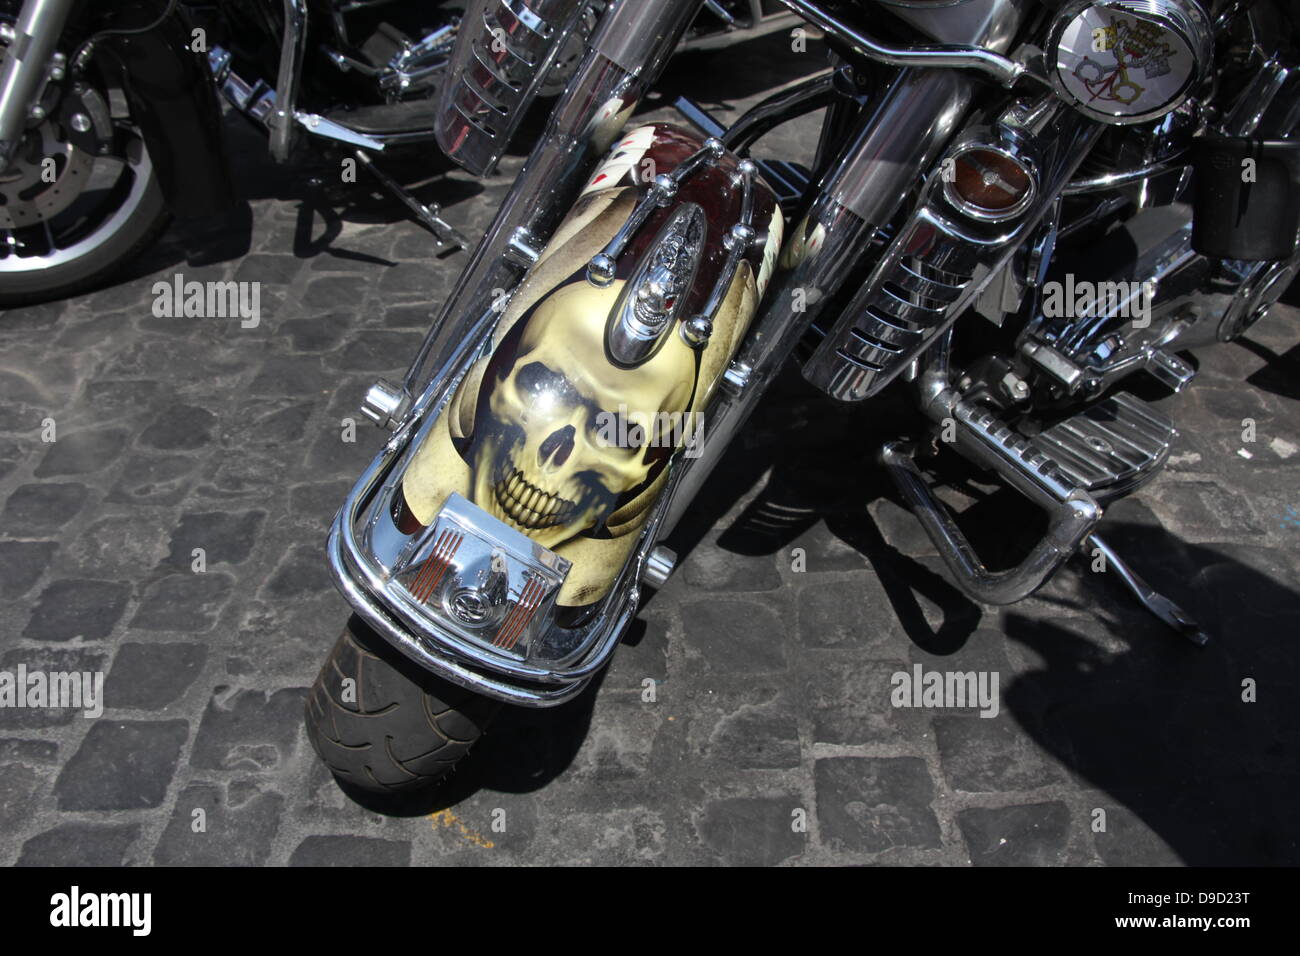 16 June 2013 Harley Davidson enthusiasts converge on Saint Peter's Square, Vatican for a Papal Blessing during Sunday Mass in Rome Italy for HD110th Anniversary European   Celebration Stock Photo